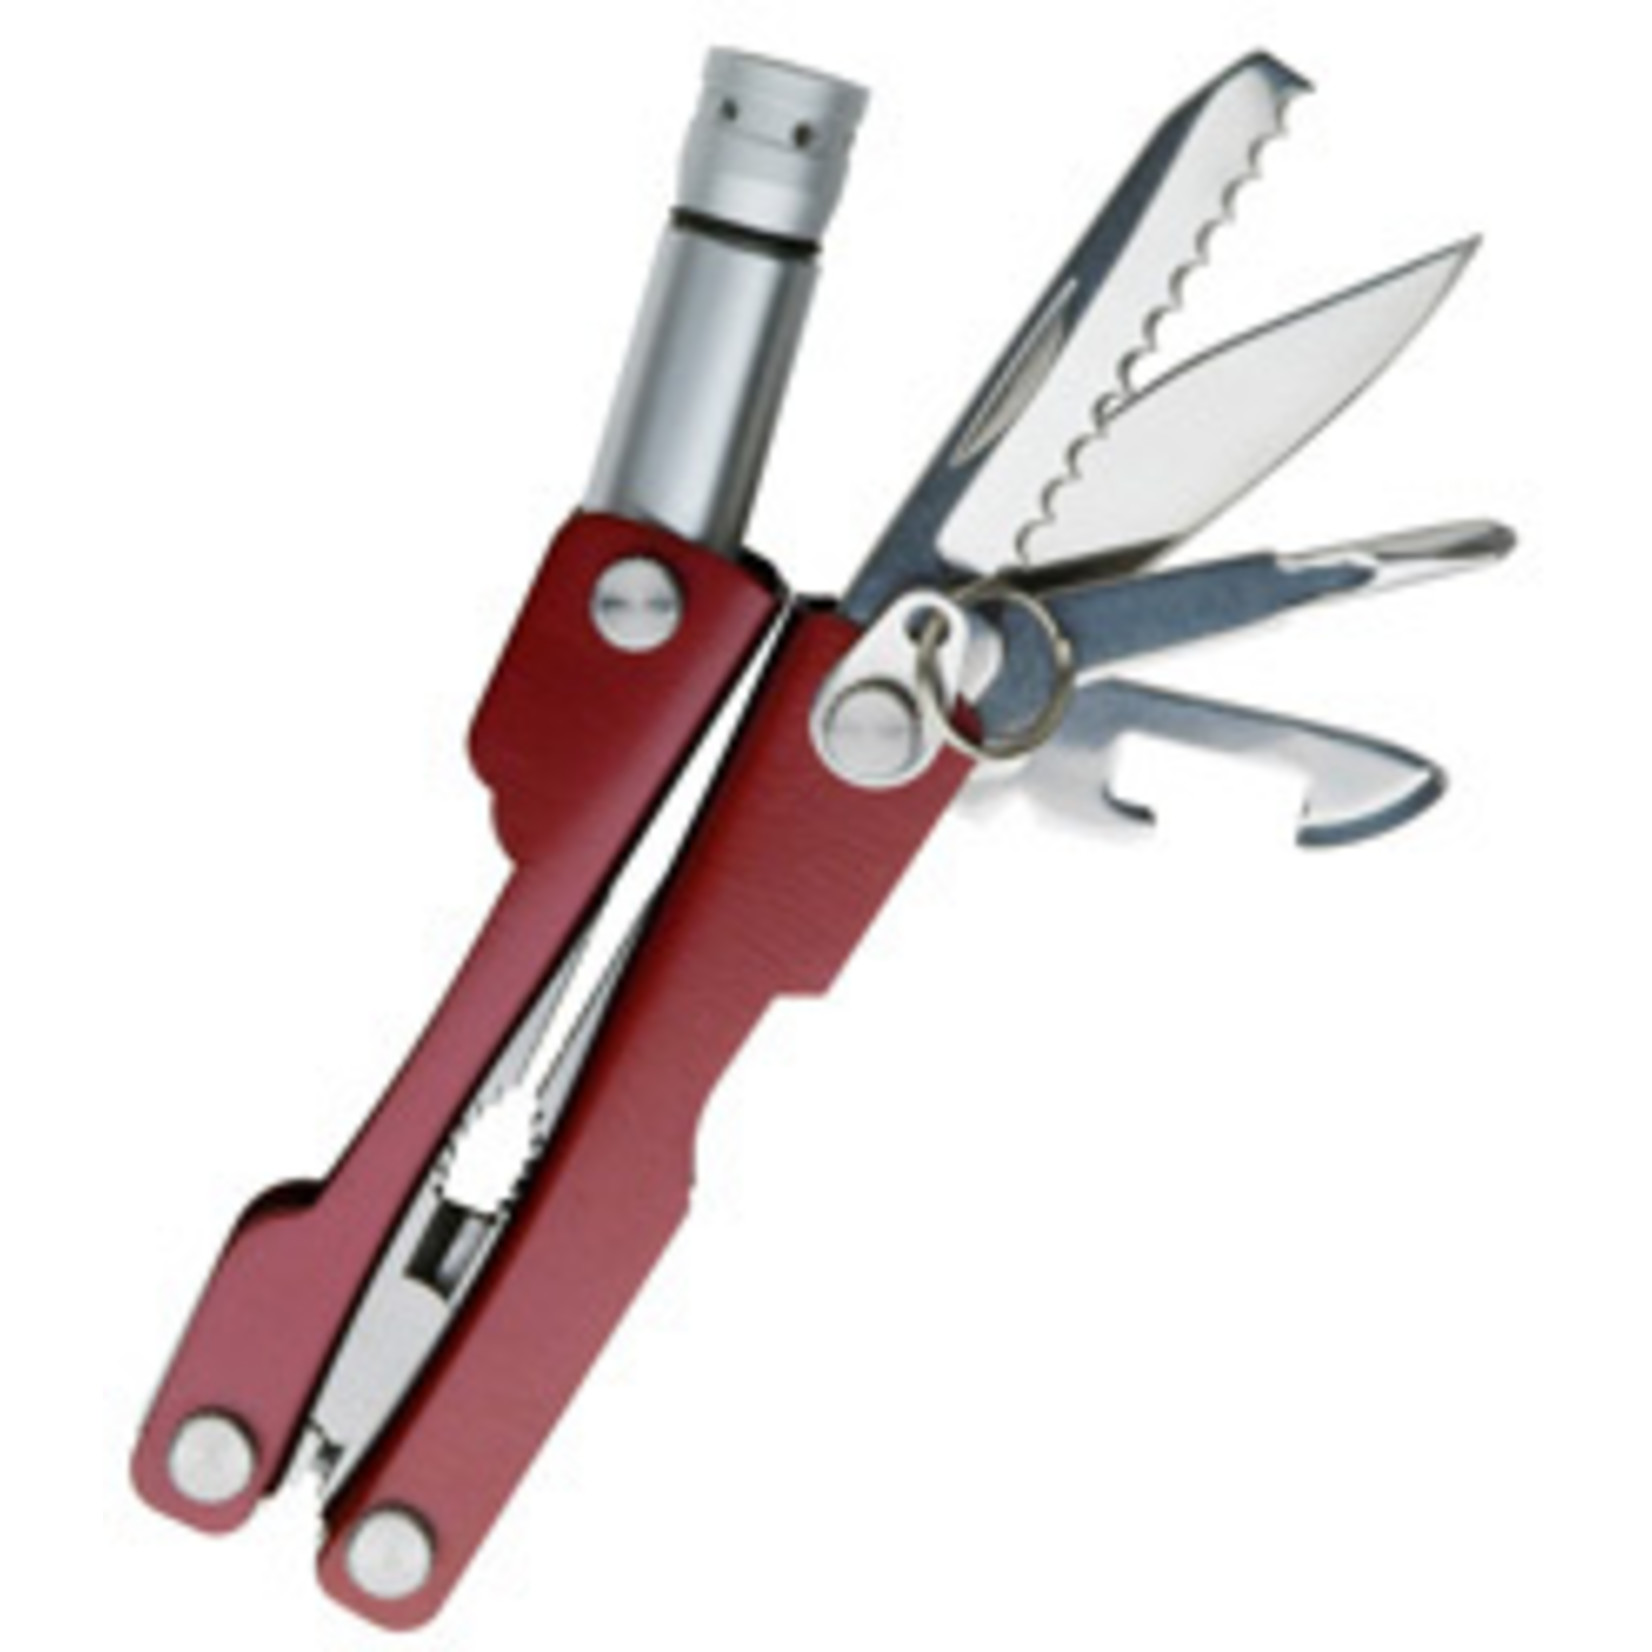 SWISS+TECH ST35000 Mini Pocket Multi-Tool, 8-in-1 Tool, Use During Camping,  Sports (Single Pack) - Multitools 